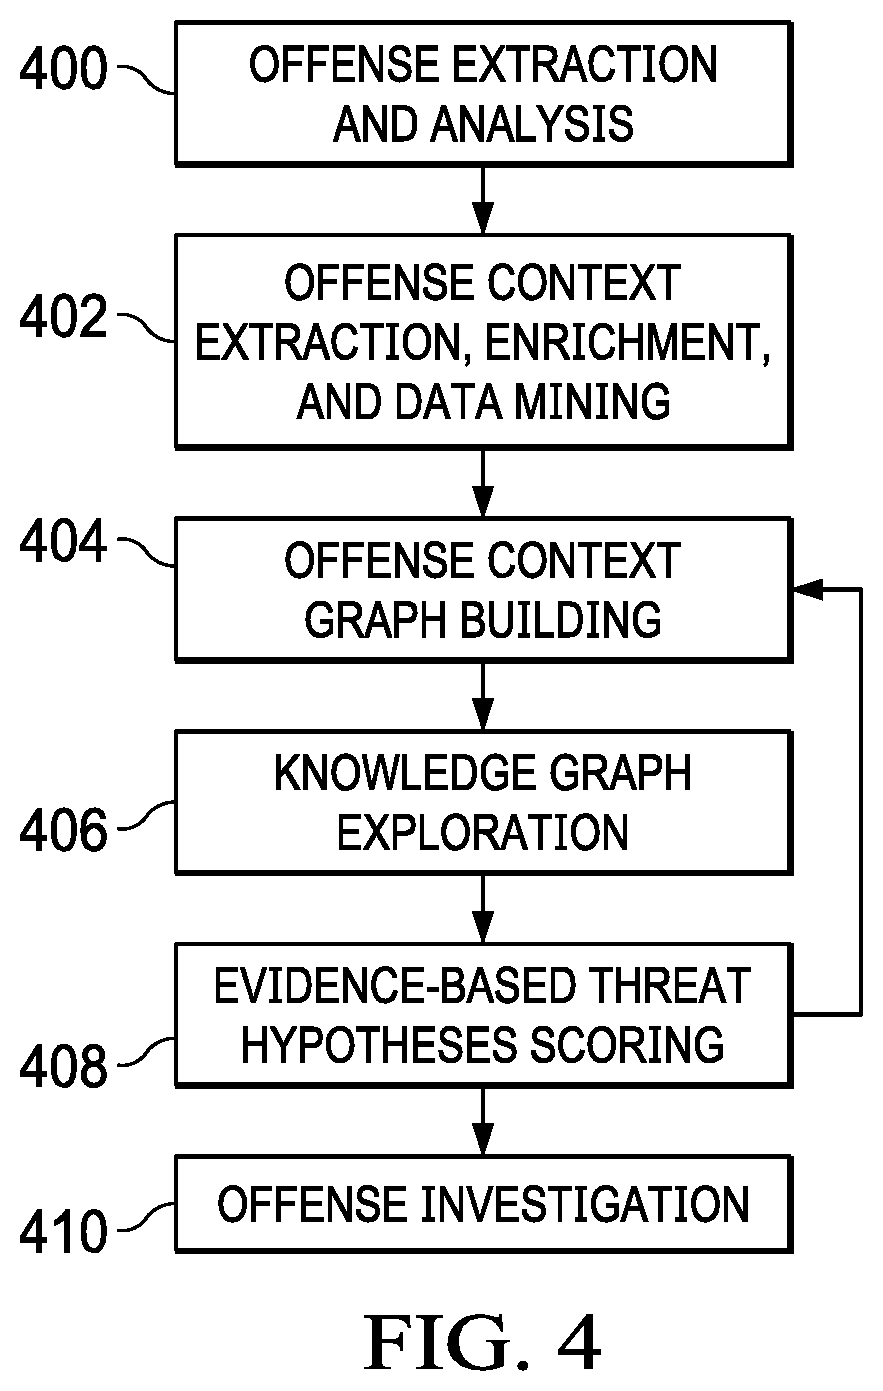 Affectedness scoring engine for cyber threat intelligence services